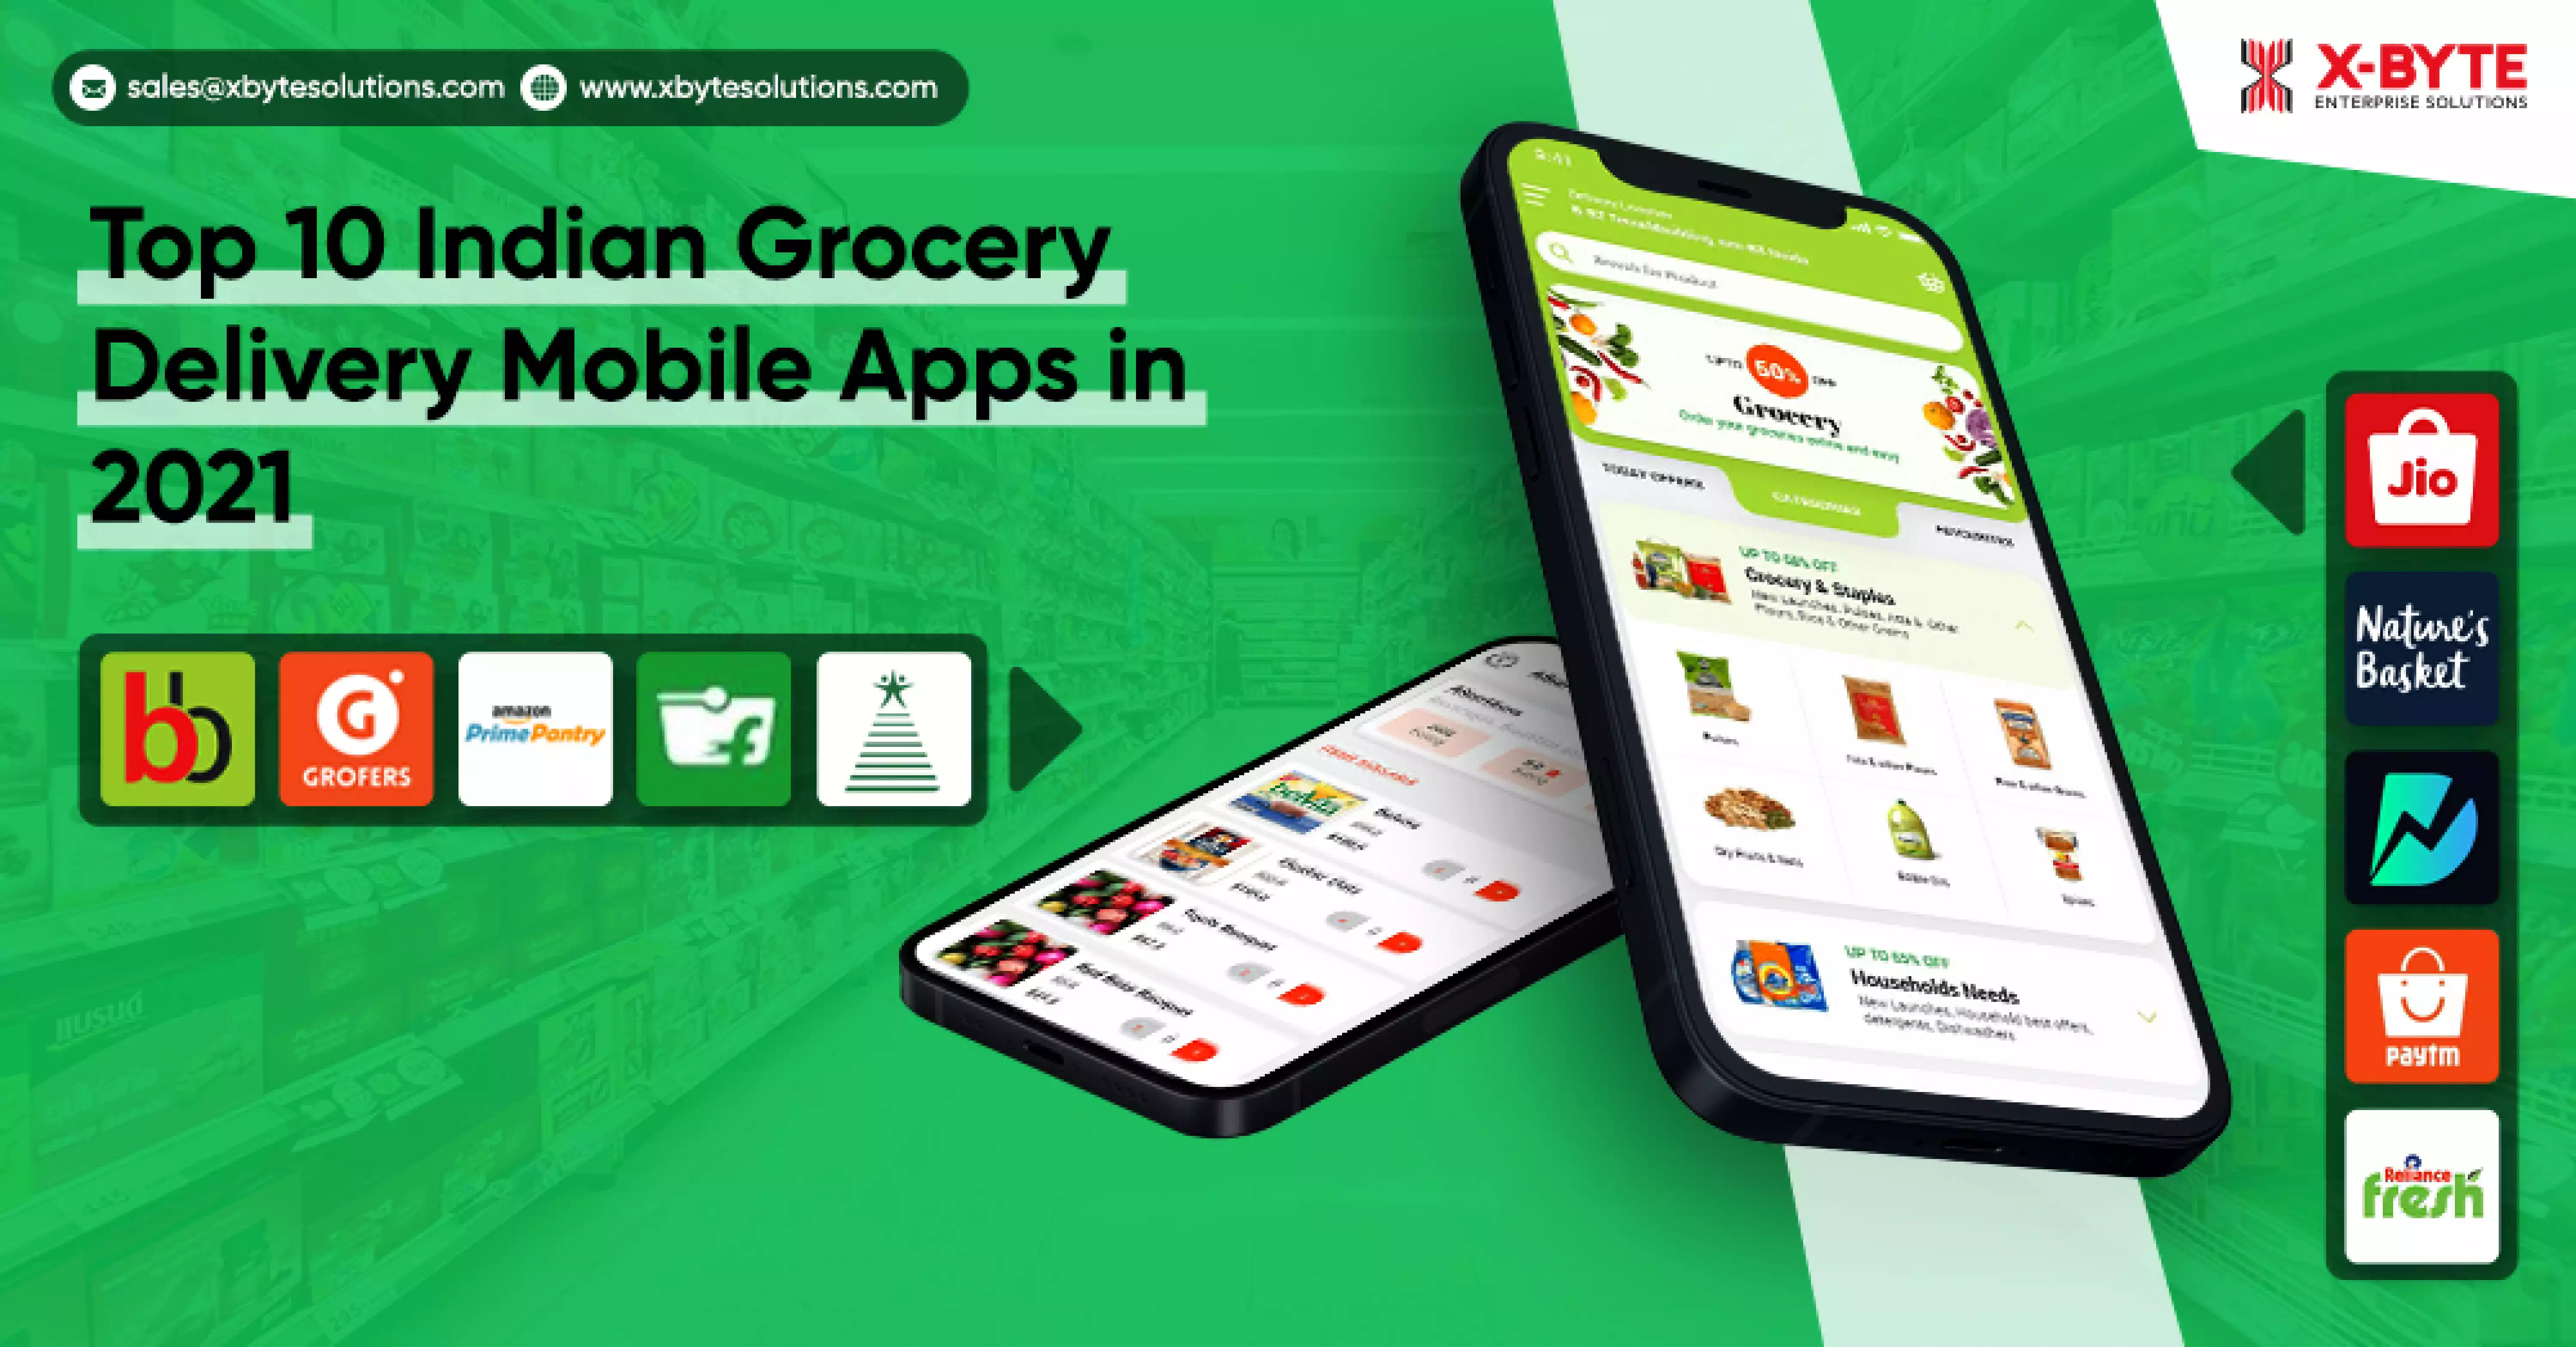 Top 10 Indian Grocery Delivery Mobile Apps in 2021